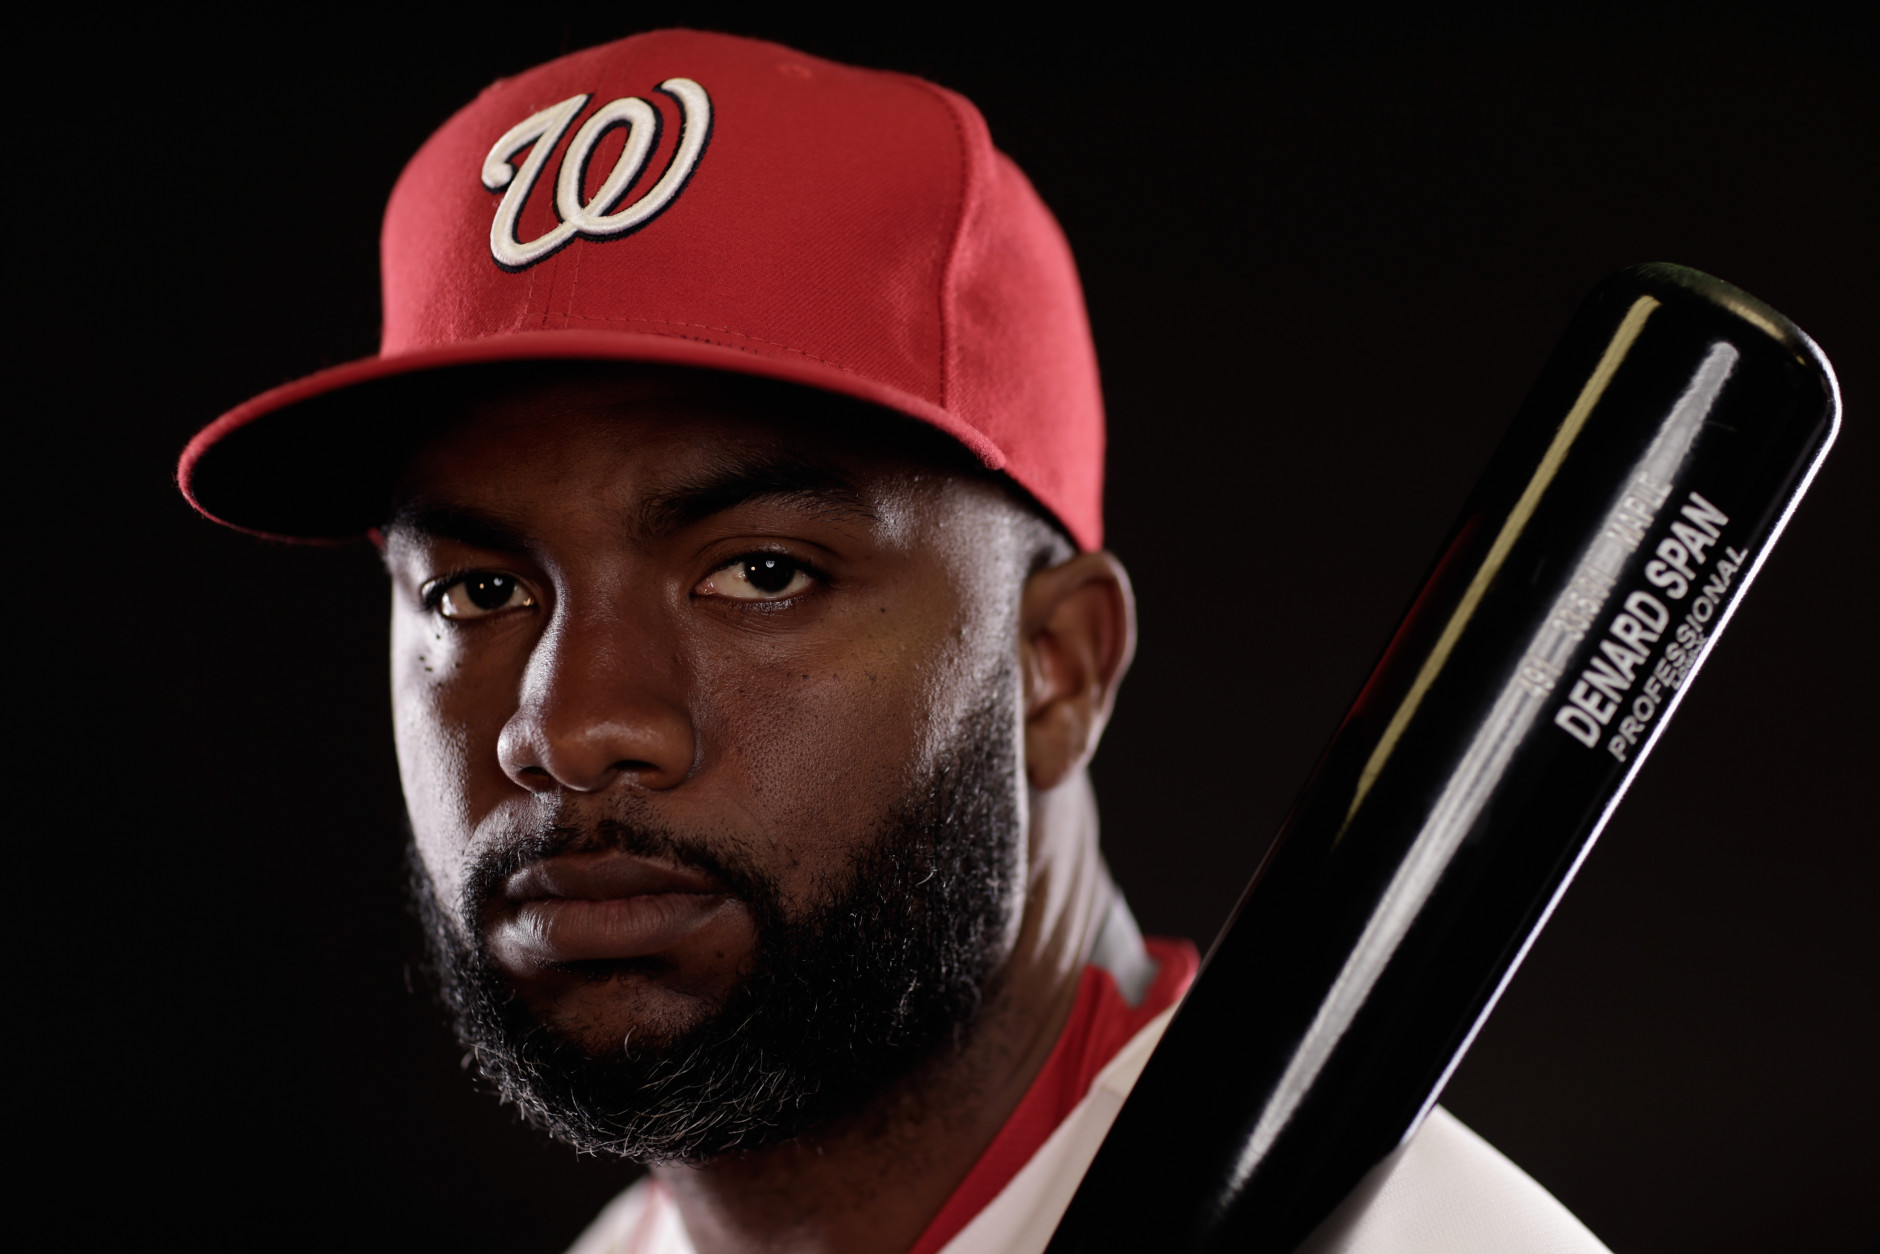 VIERA, FL - MARCH 01:  Denard Span #2 of the Washington Nationals poses for a portrait during photo day at Space Coast Stadium on March 1, 2015 in Viera, Florida.  (Photo by Chris Trotman/Getty Images)